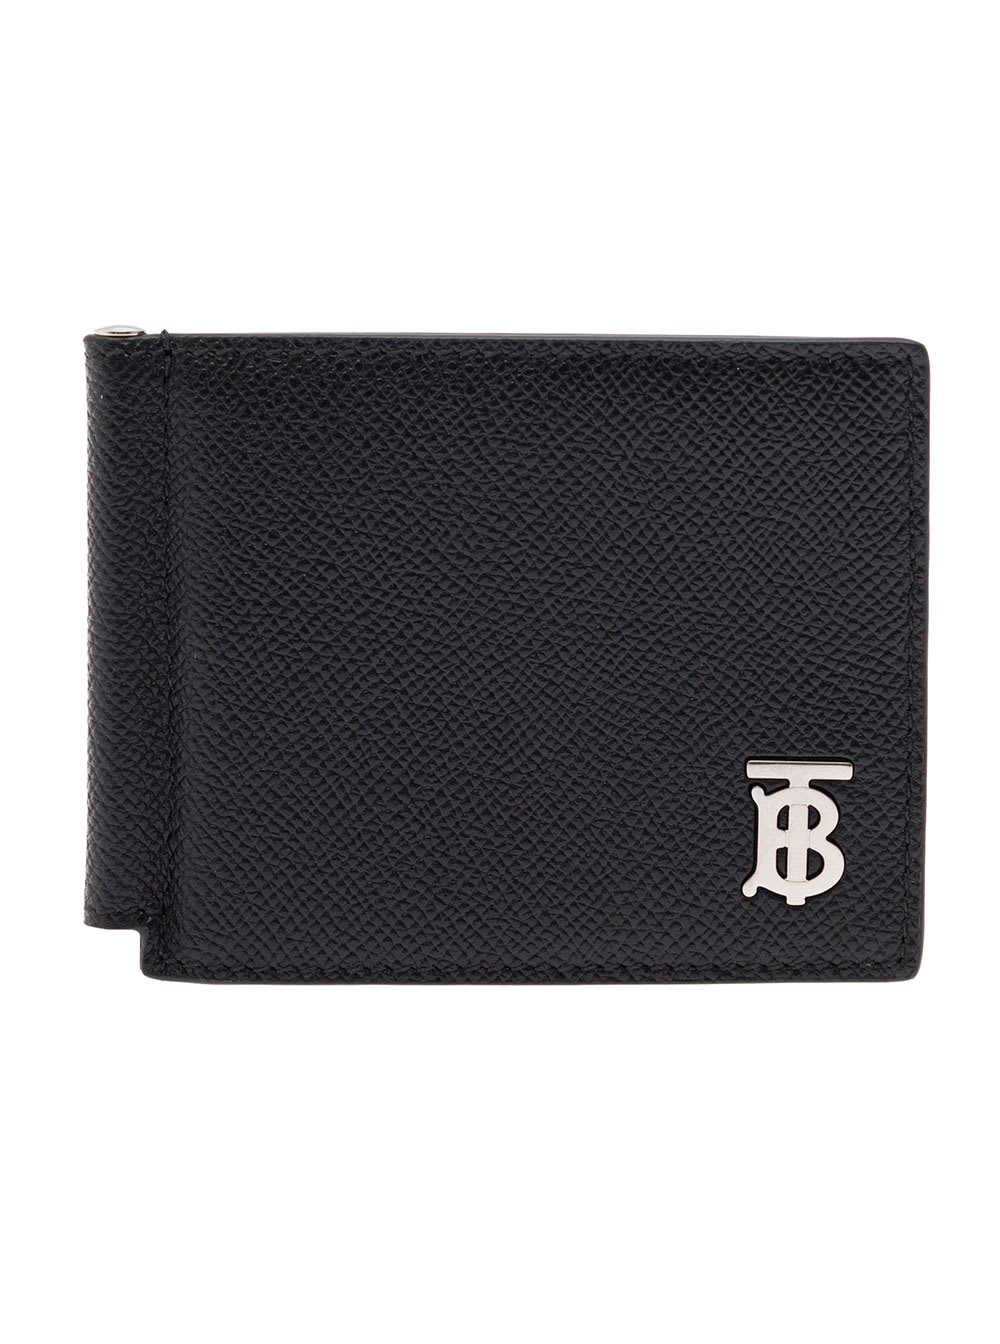 Burberry Black Bi-fold Wallet With Clip Money In Leather | ModeSens